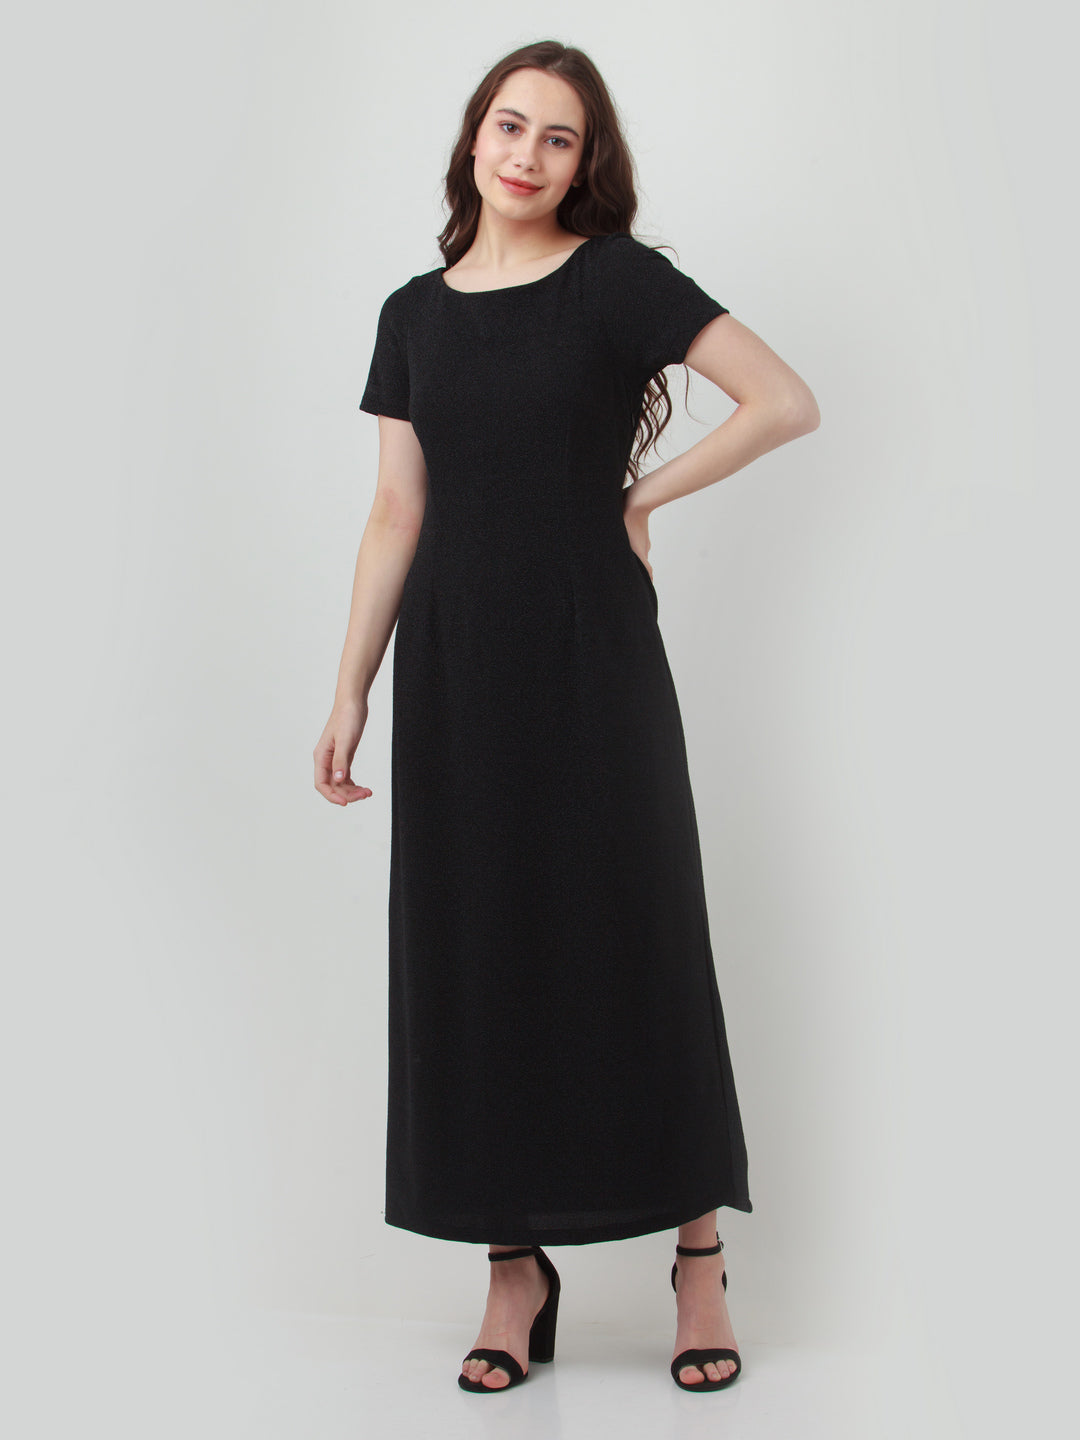 Buy MISTREE Rayon Blend Stitched Straight Gown Black at Amazon.in